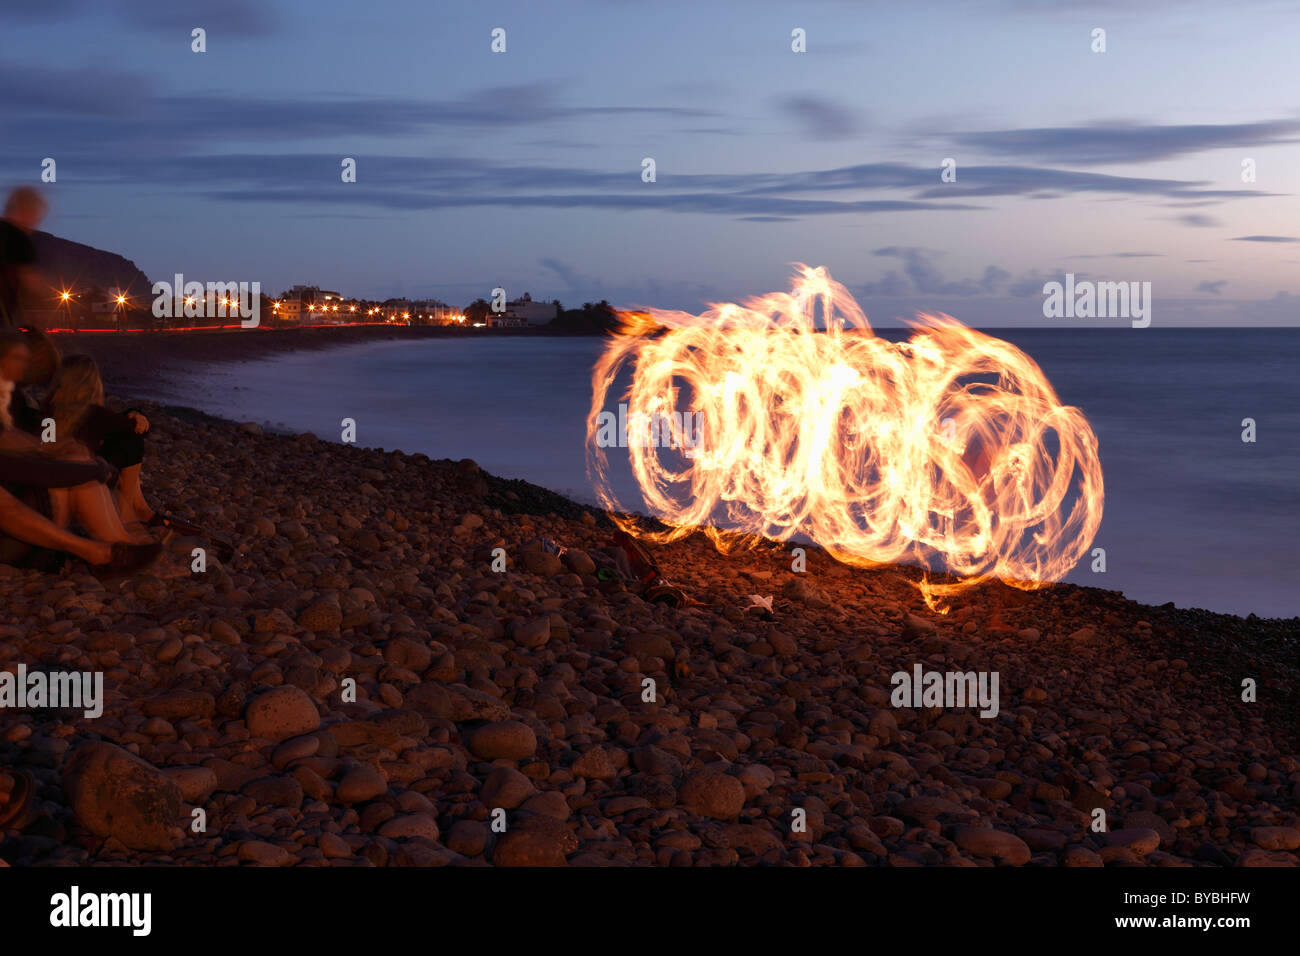 Fire dancer with torches, La Playa, Valle Gran Rey, La Gomera, Canary Islands, Spain, Europe Stock Photo